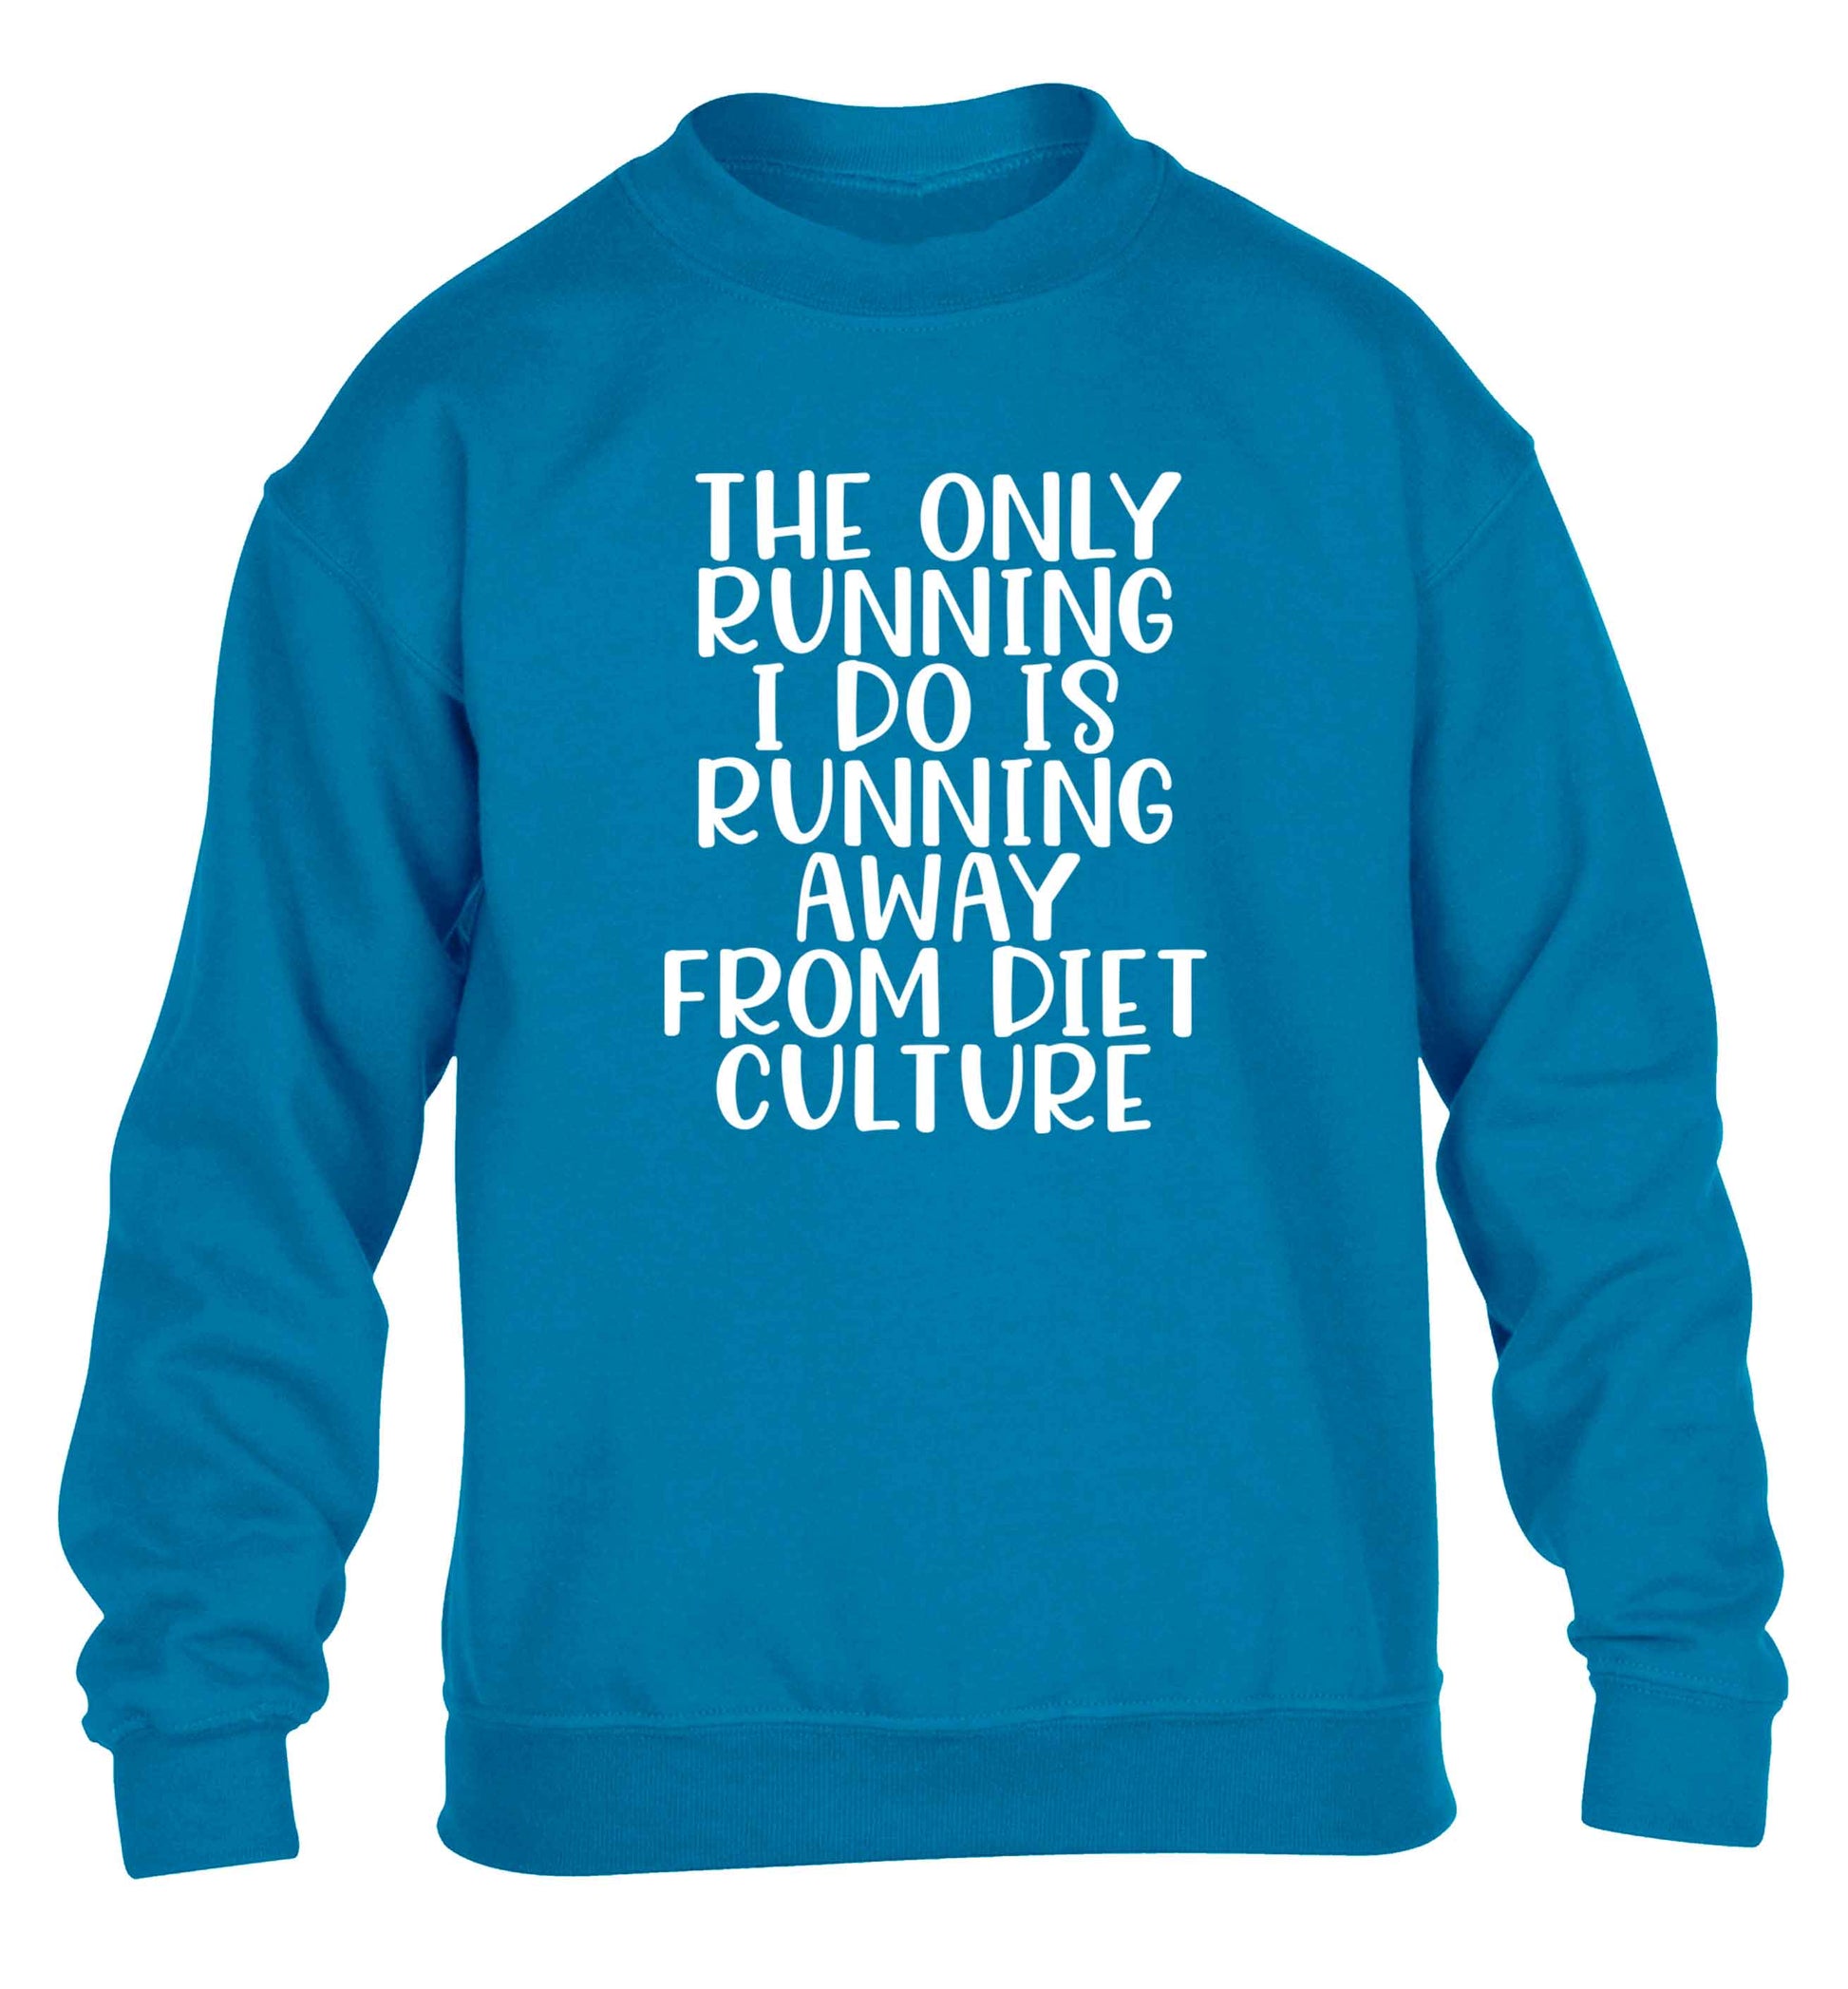 The only running I do is running away from diet culture children's blue sweater 12-13 Years